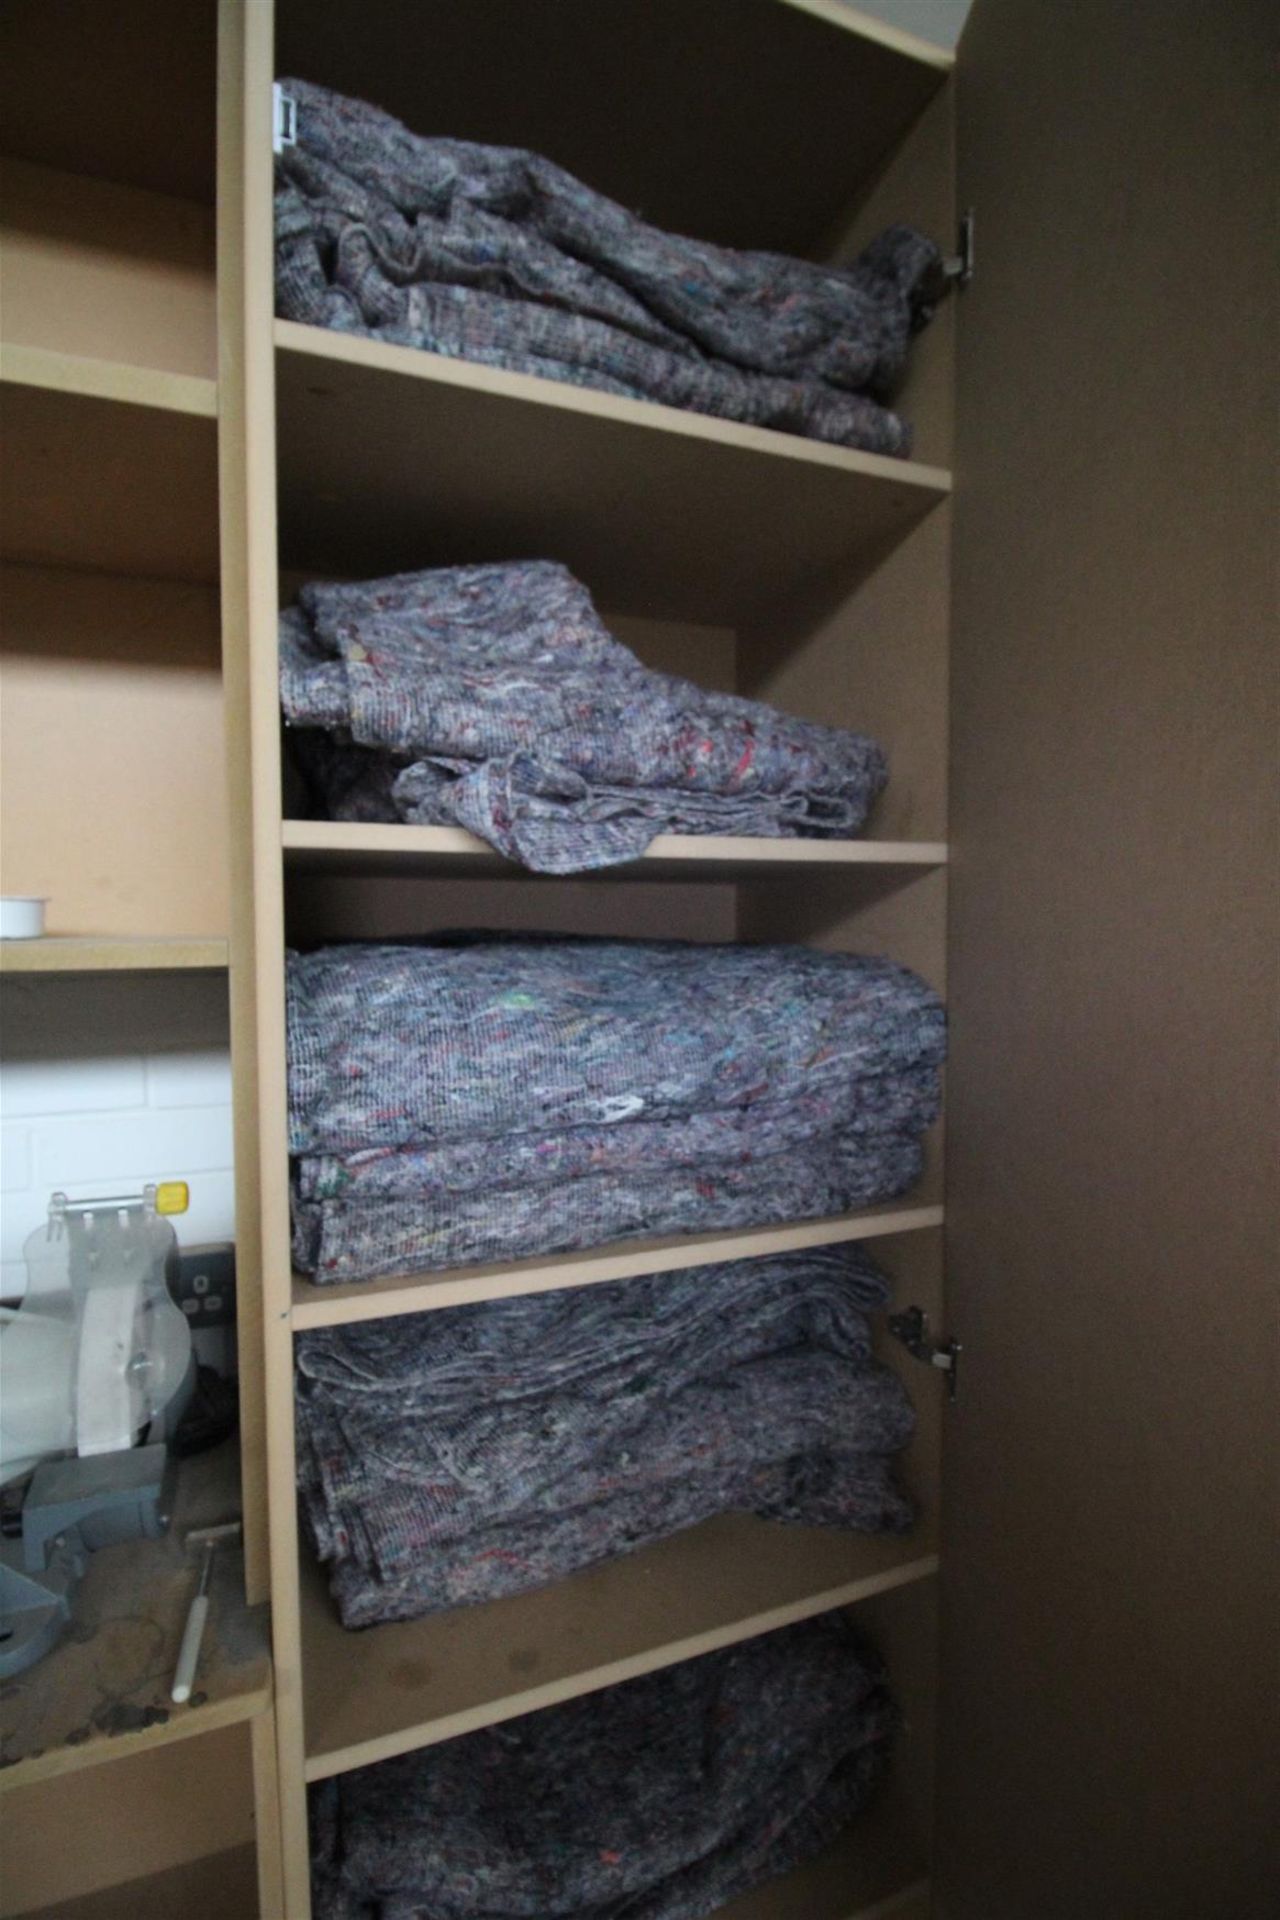 CONTENTS OF 5 SHELVES OF RACK OF REMOVAL MANS BLANKETS